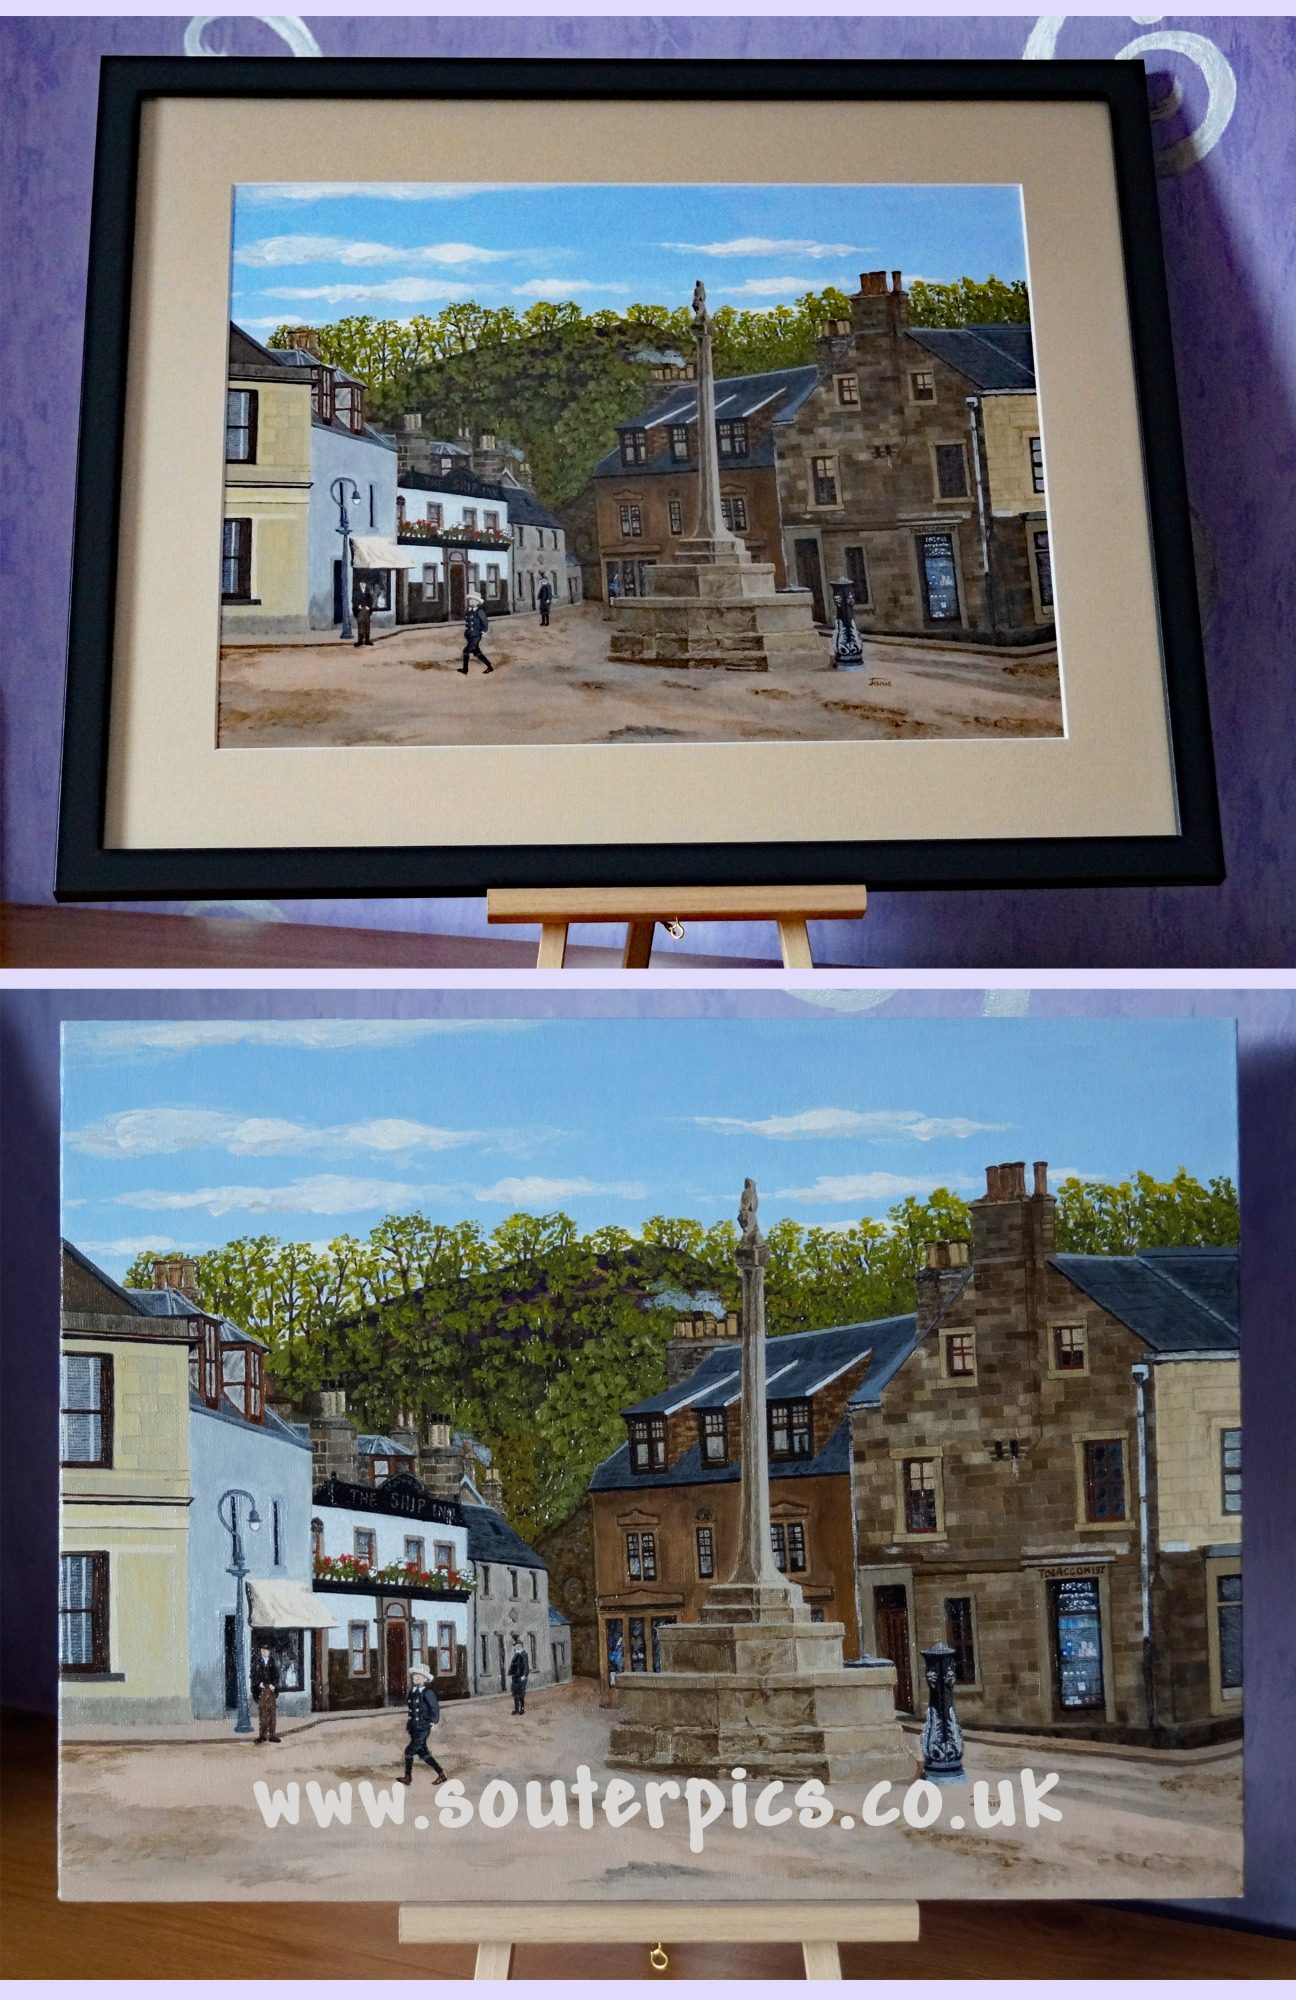 Currently on sale at The Picture Framers, Lawyers Brae, Galashiels £195.00 Size: 39 x 29 cms 